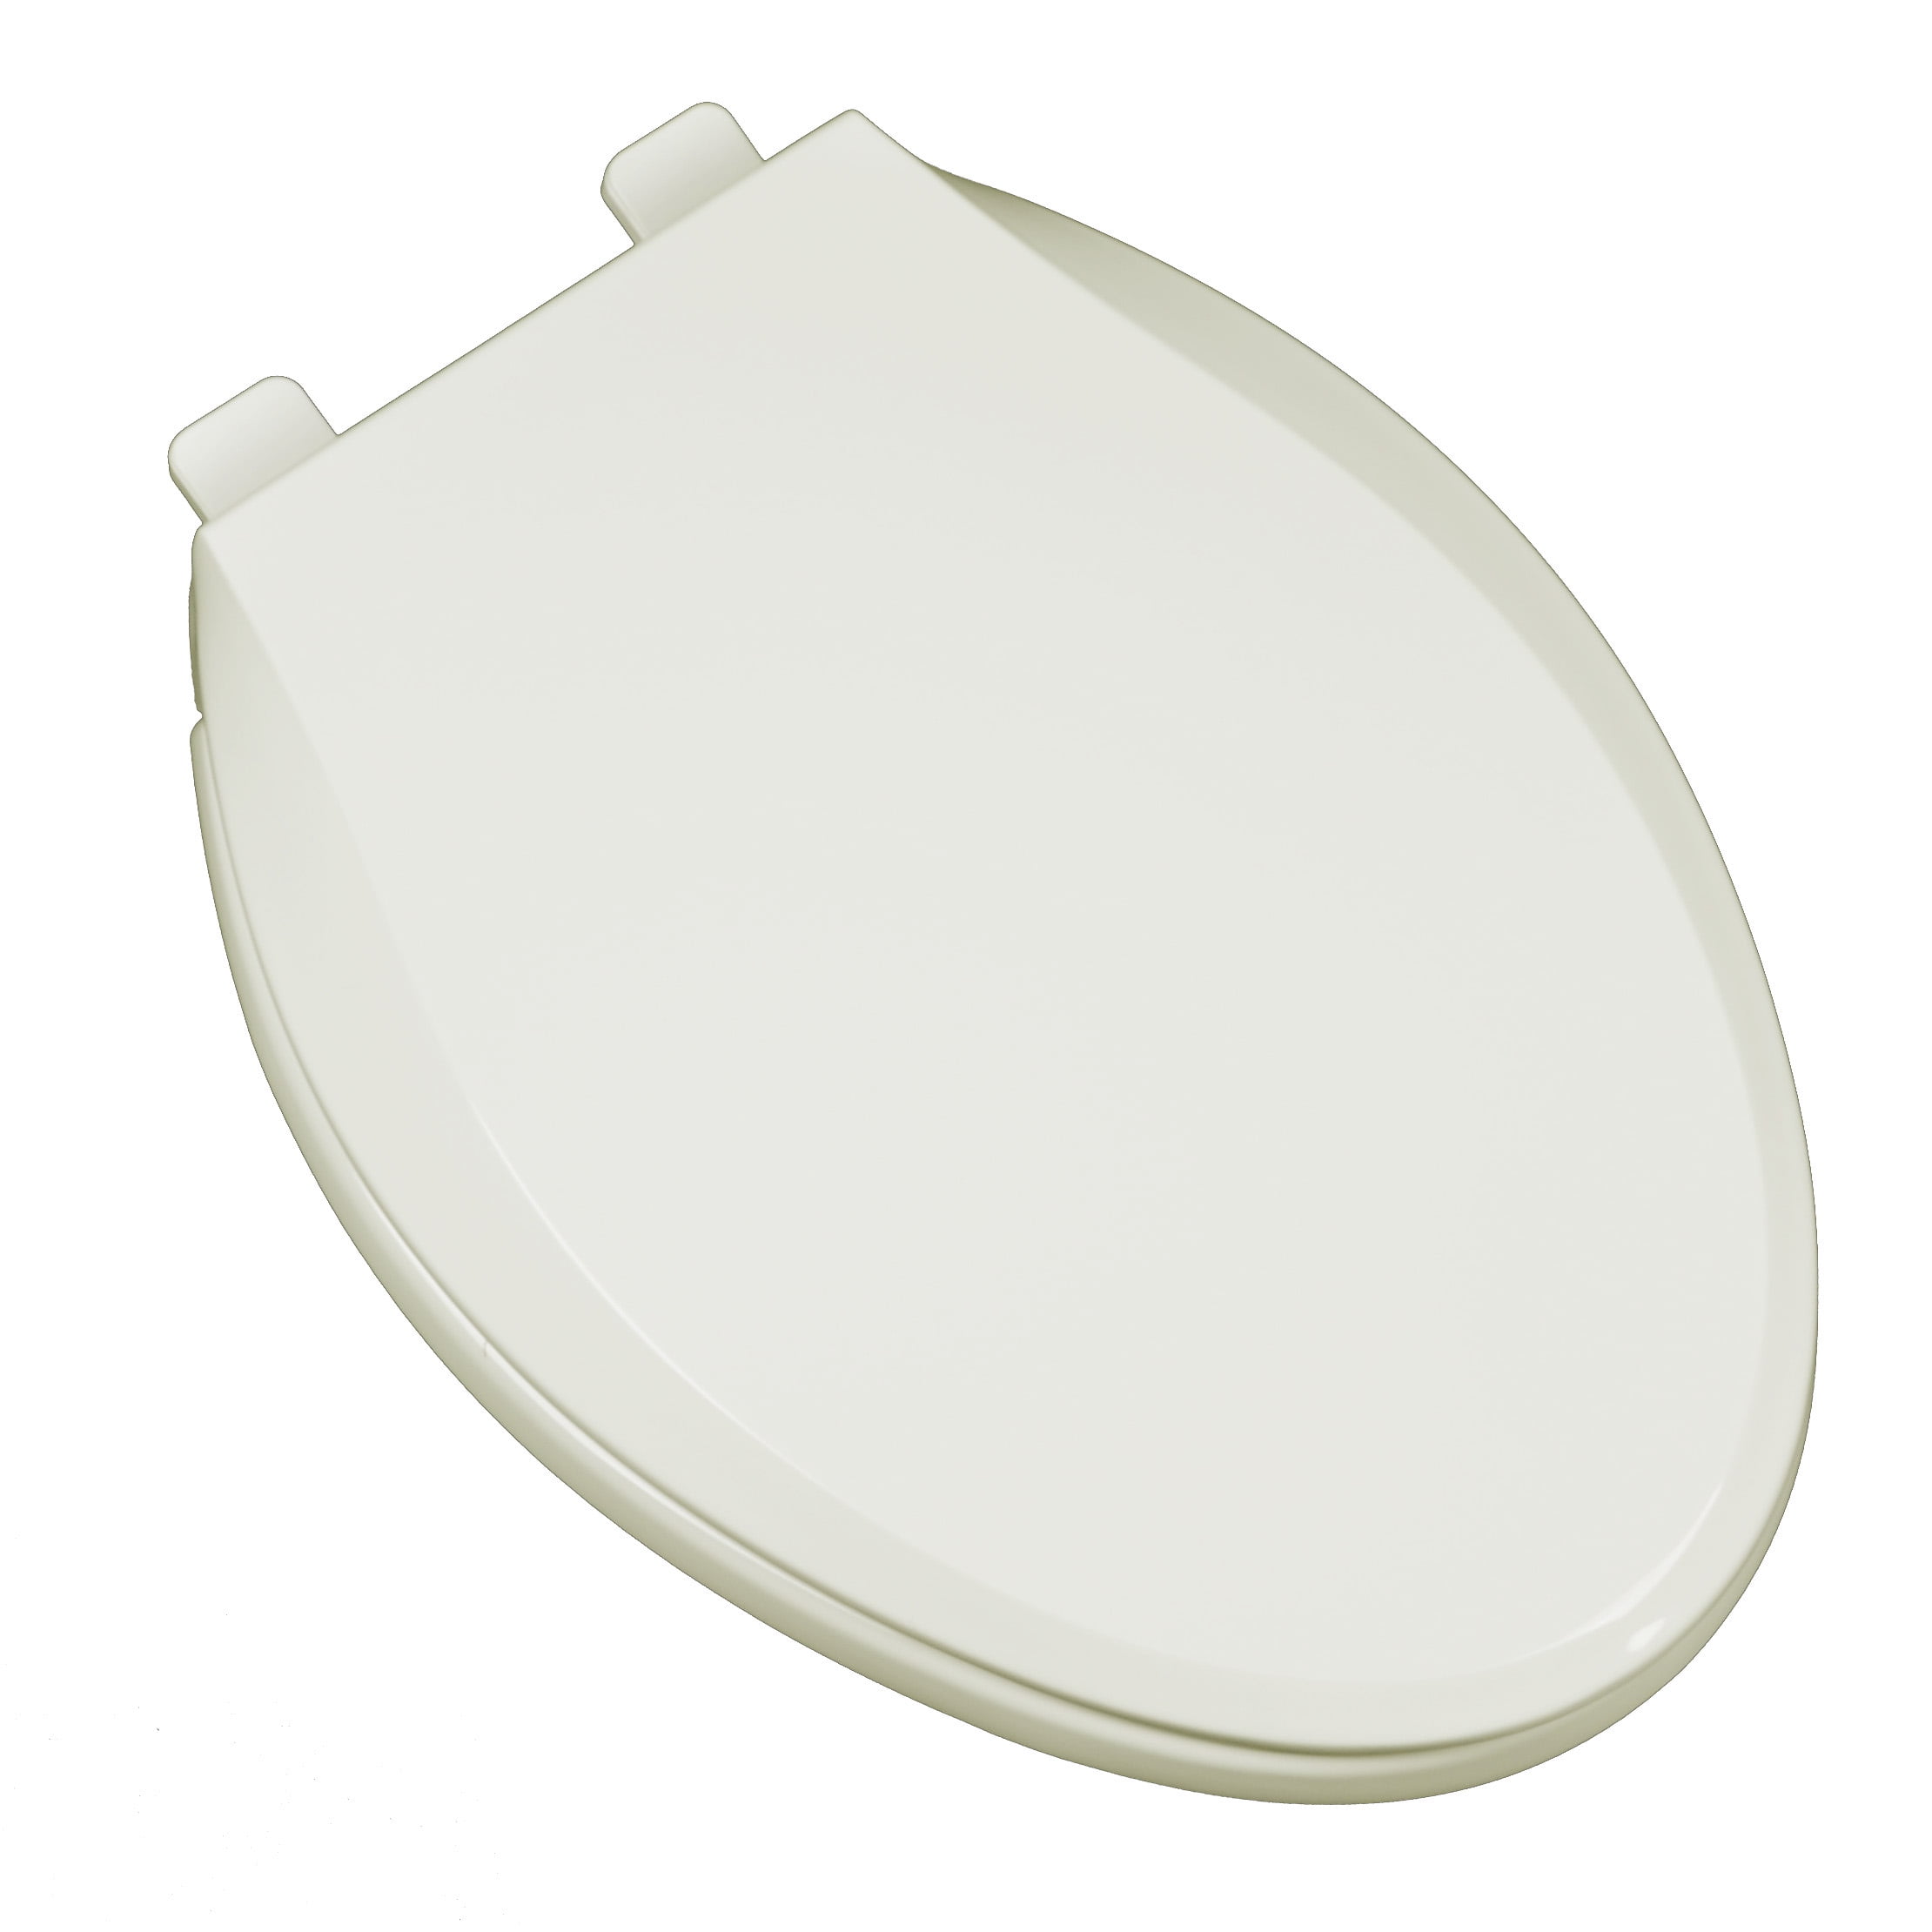 Soft Toilet Seat OVAL Heavy Duty Bathroom Seats Easy Fit with Adjustable Hinge 